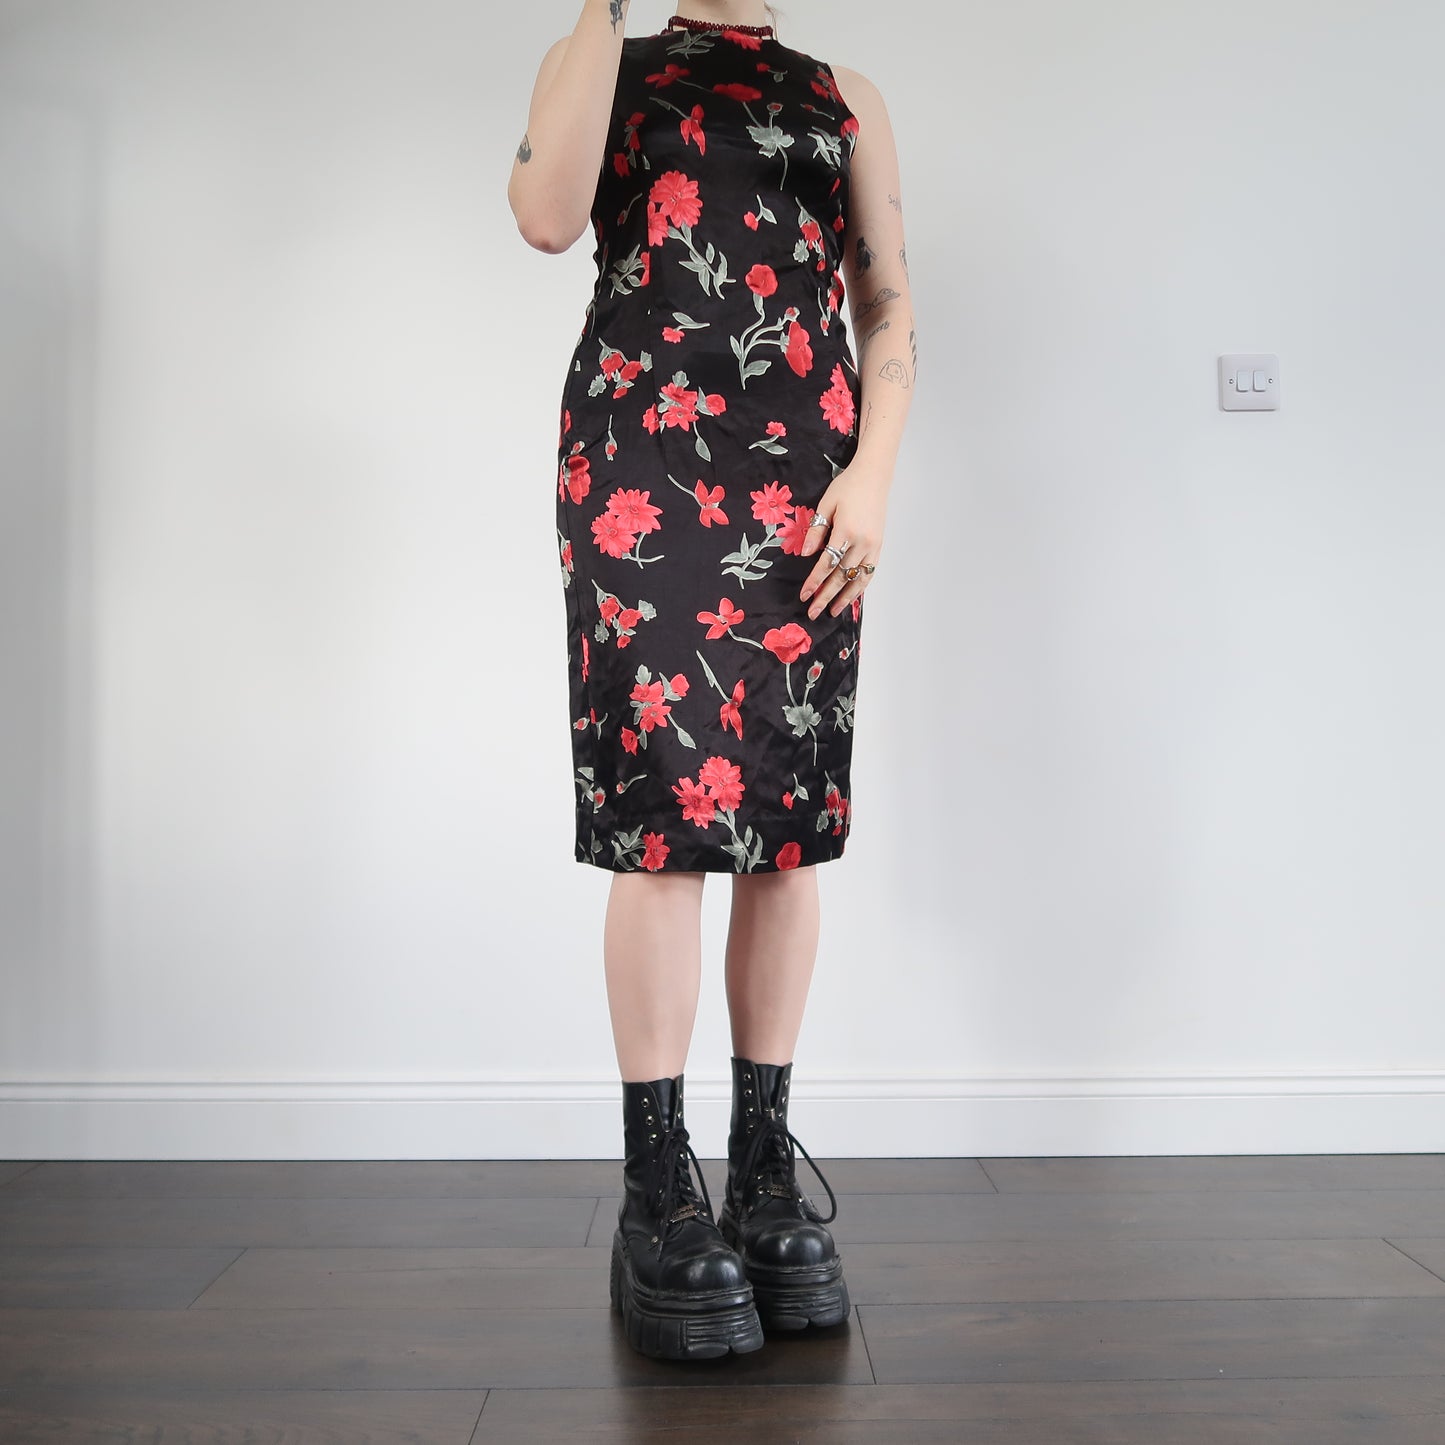 Red and black floral dress - size 10